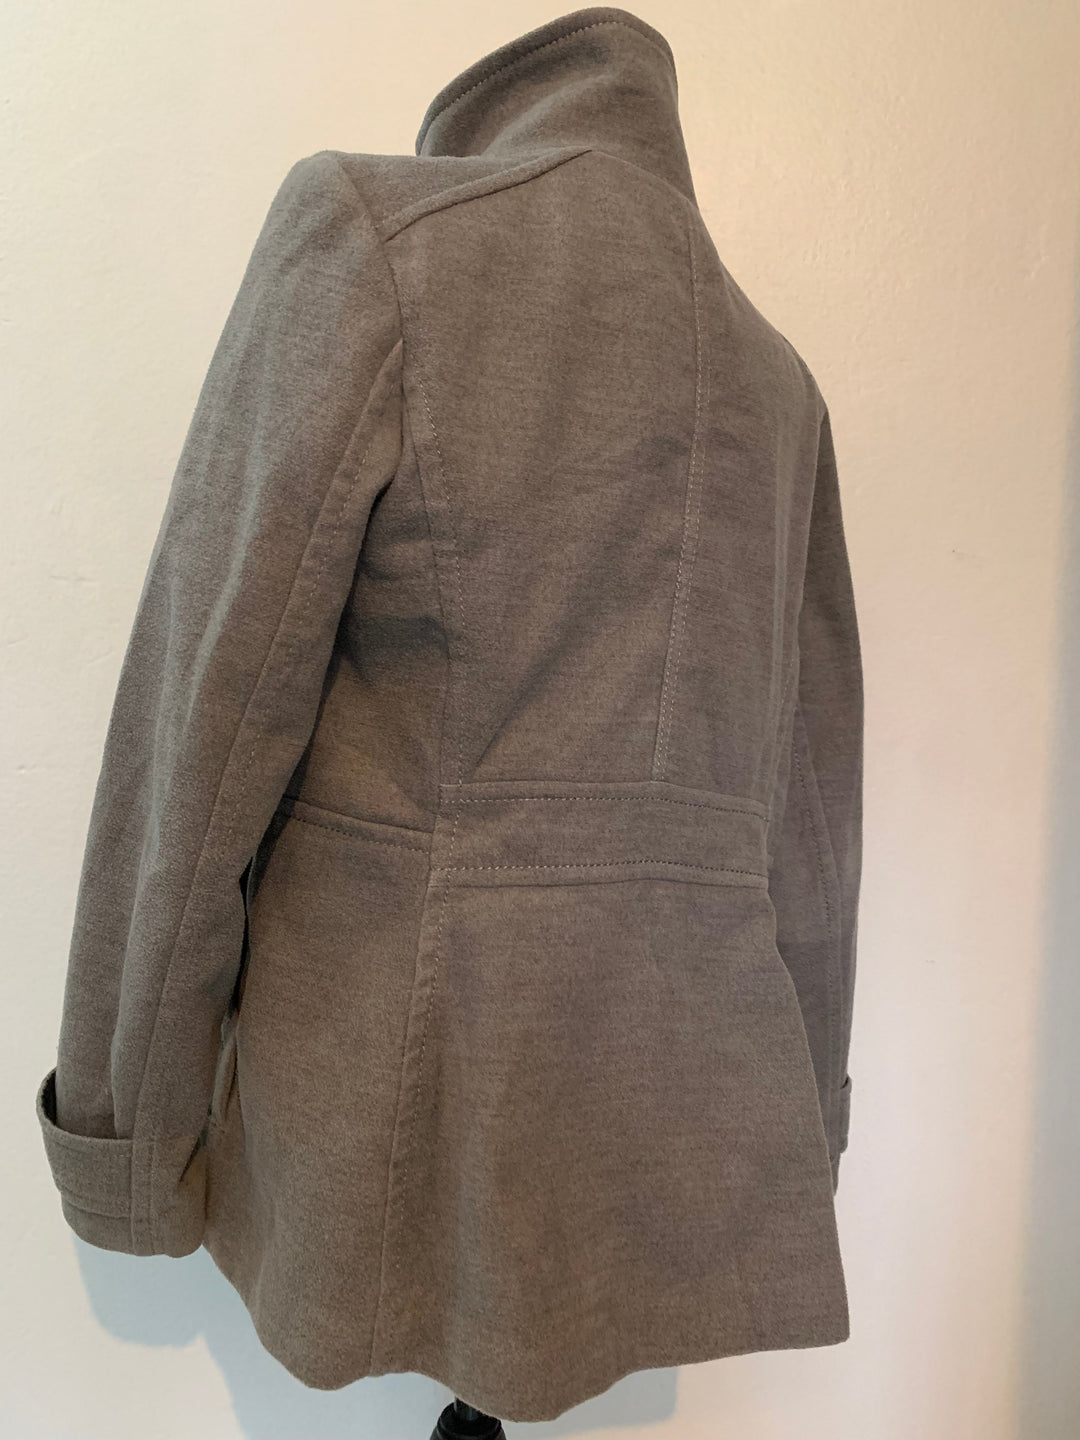 Image of Winter coat size 34, great condition